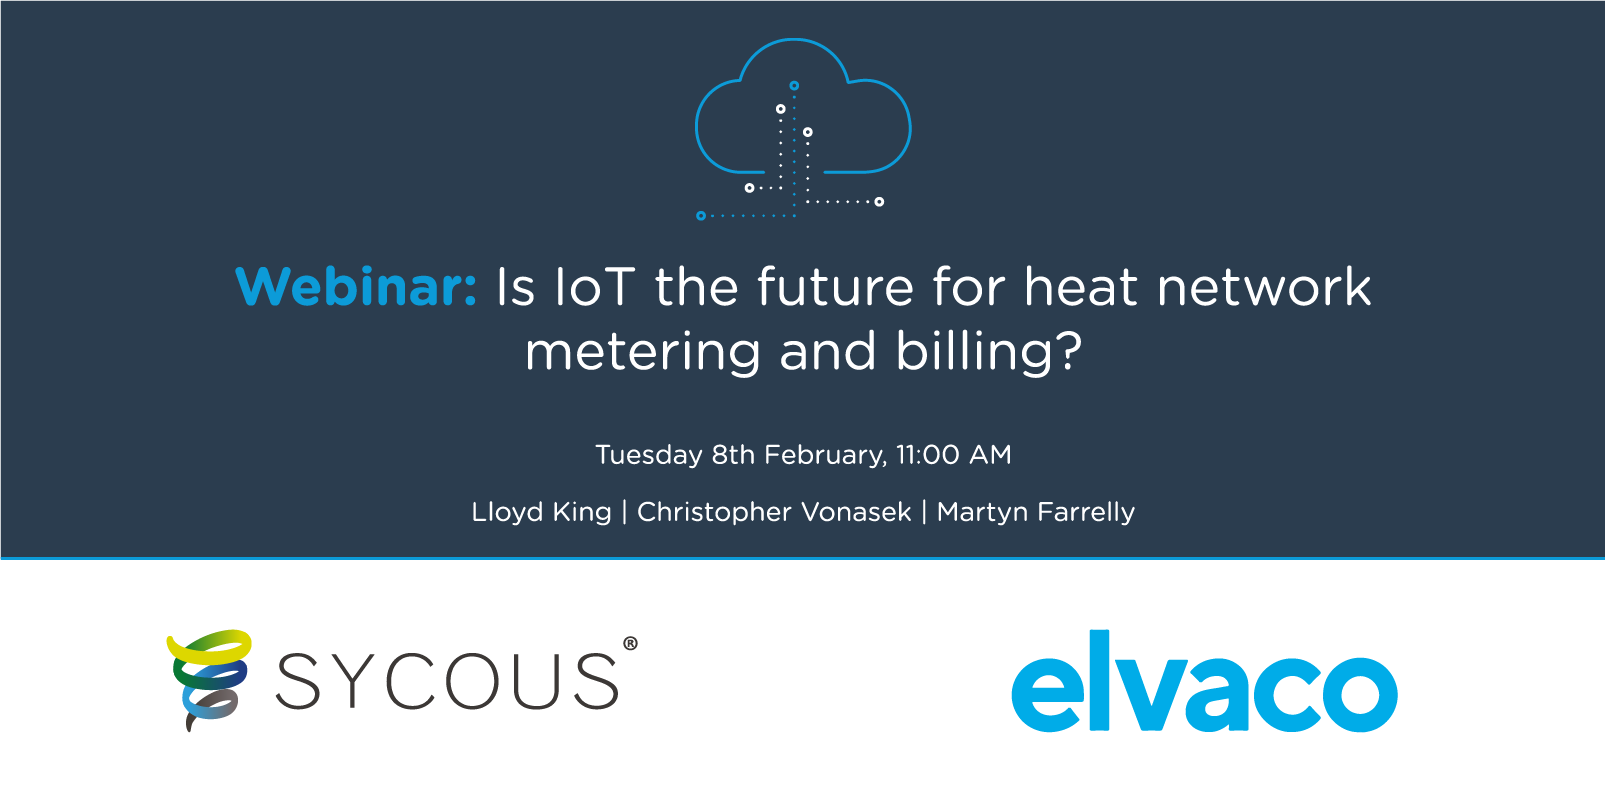 Click to register for our Sycous webinar: Is IoT the future for heat network metering and billing?